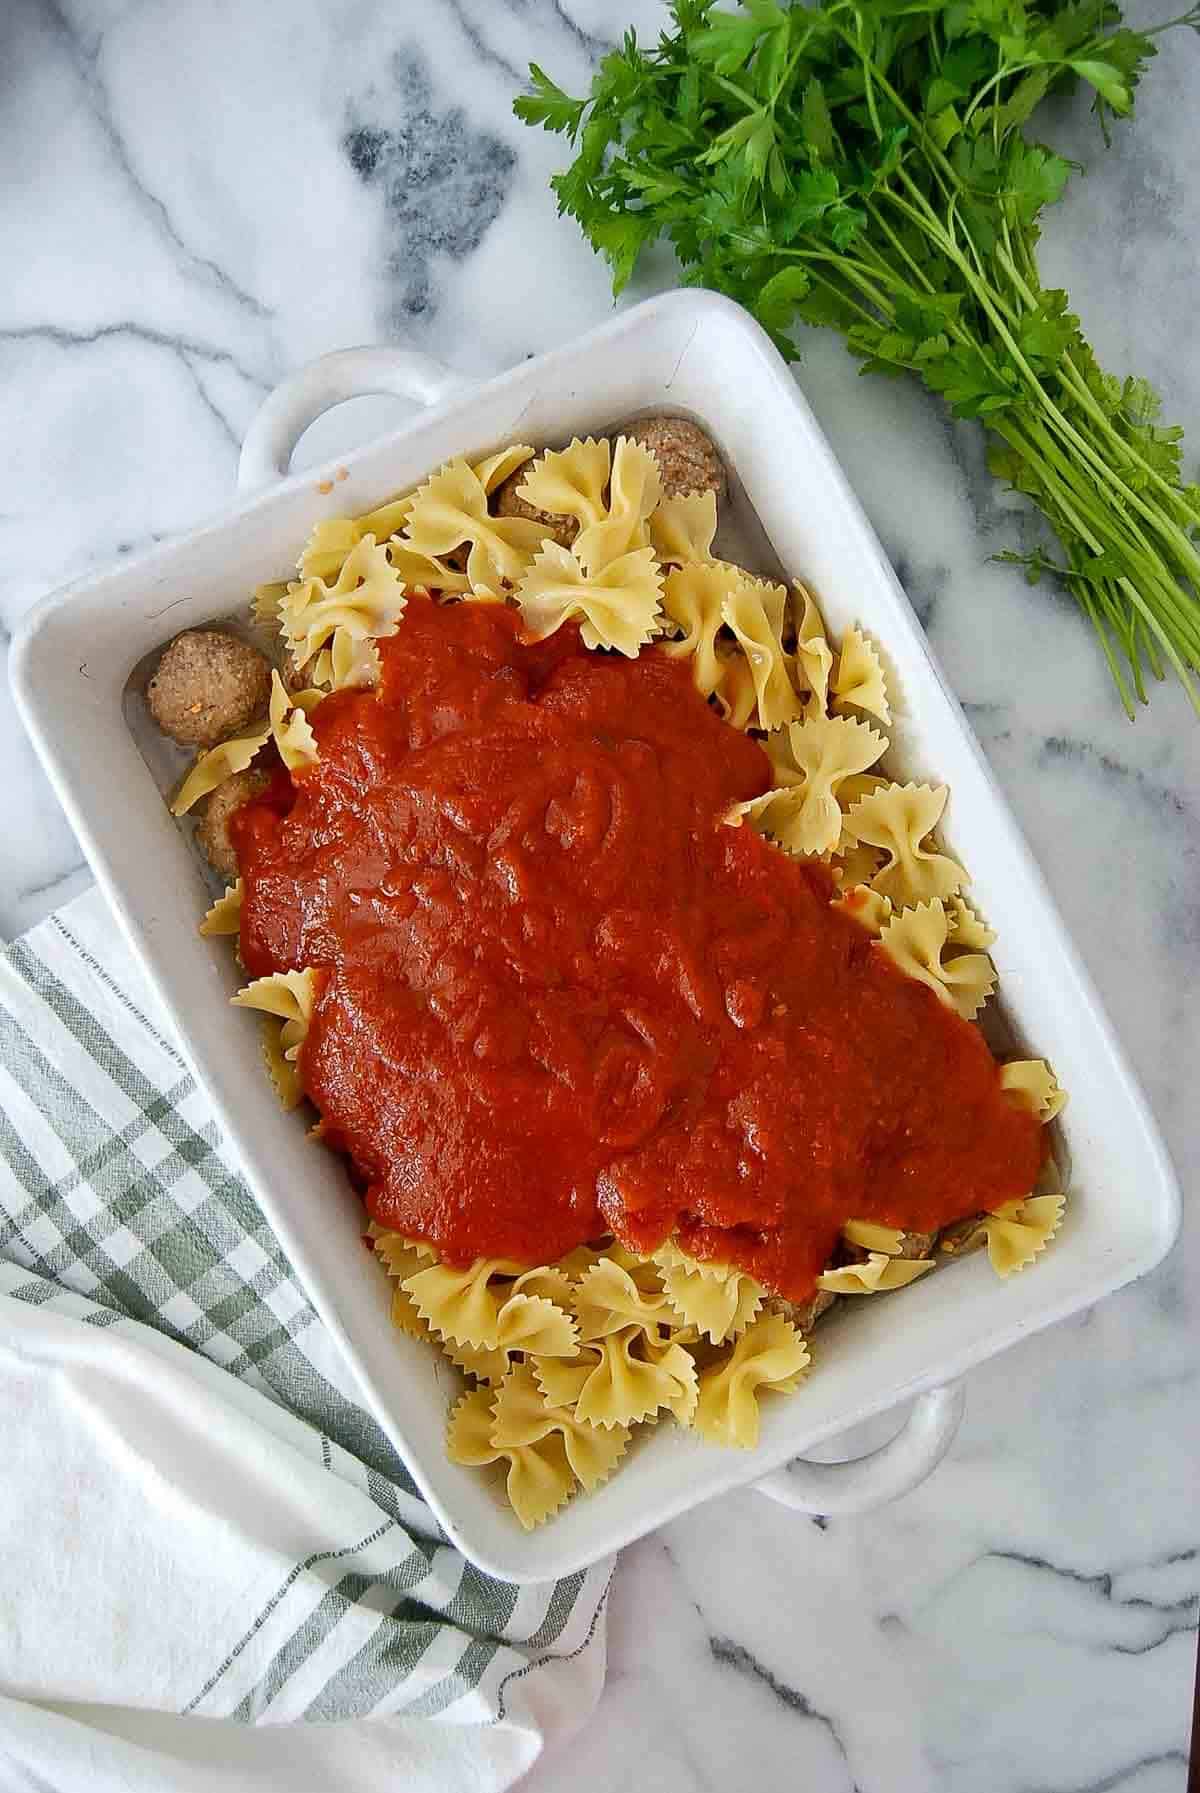 meatballs, uncooked pasta and pasta sauce in baking dish on countertop.